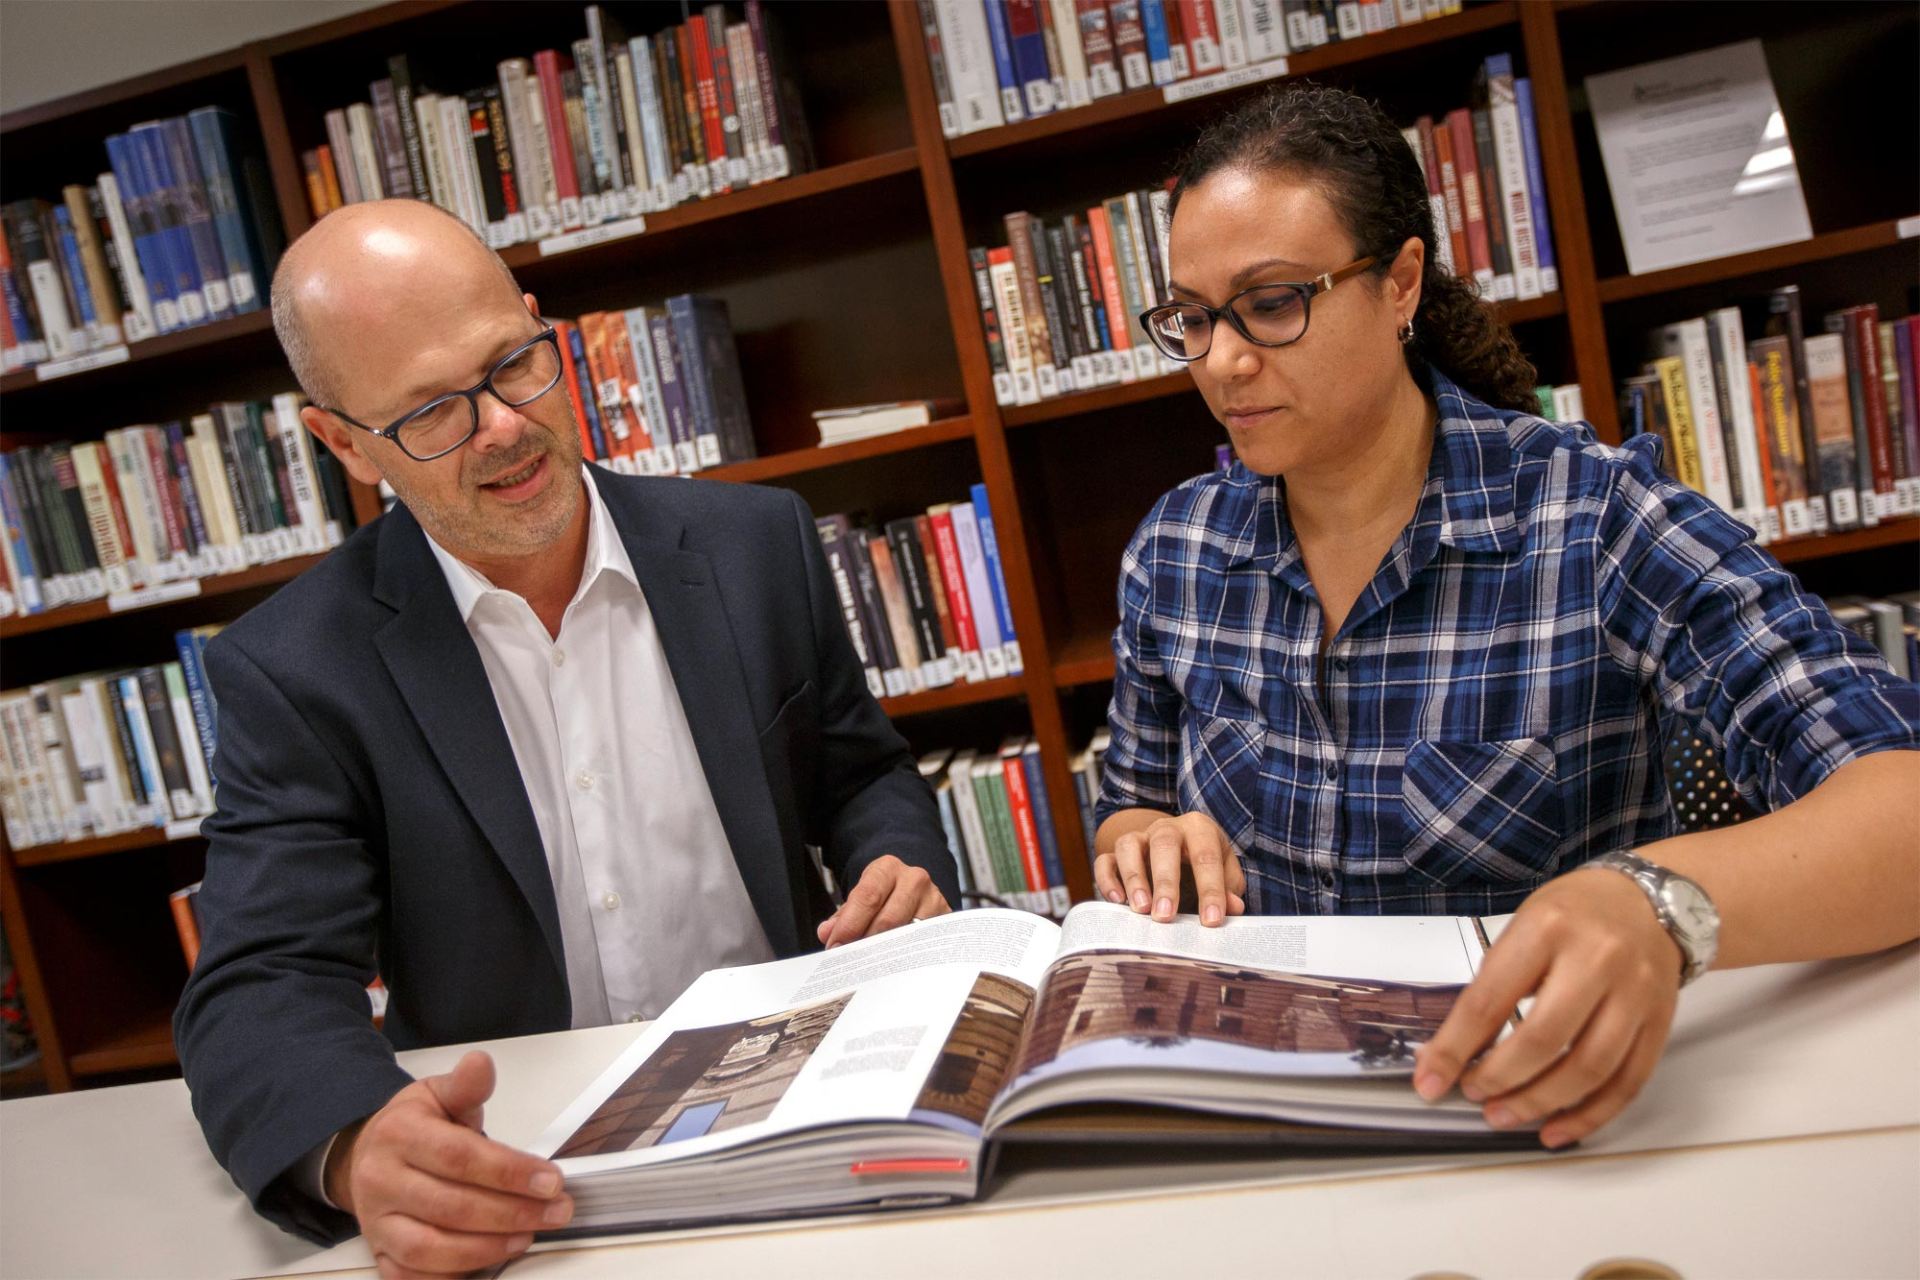 Dean Roemer and a student looking at a book